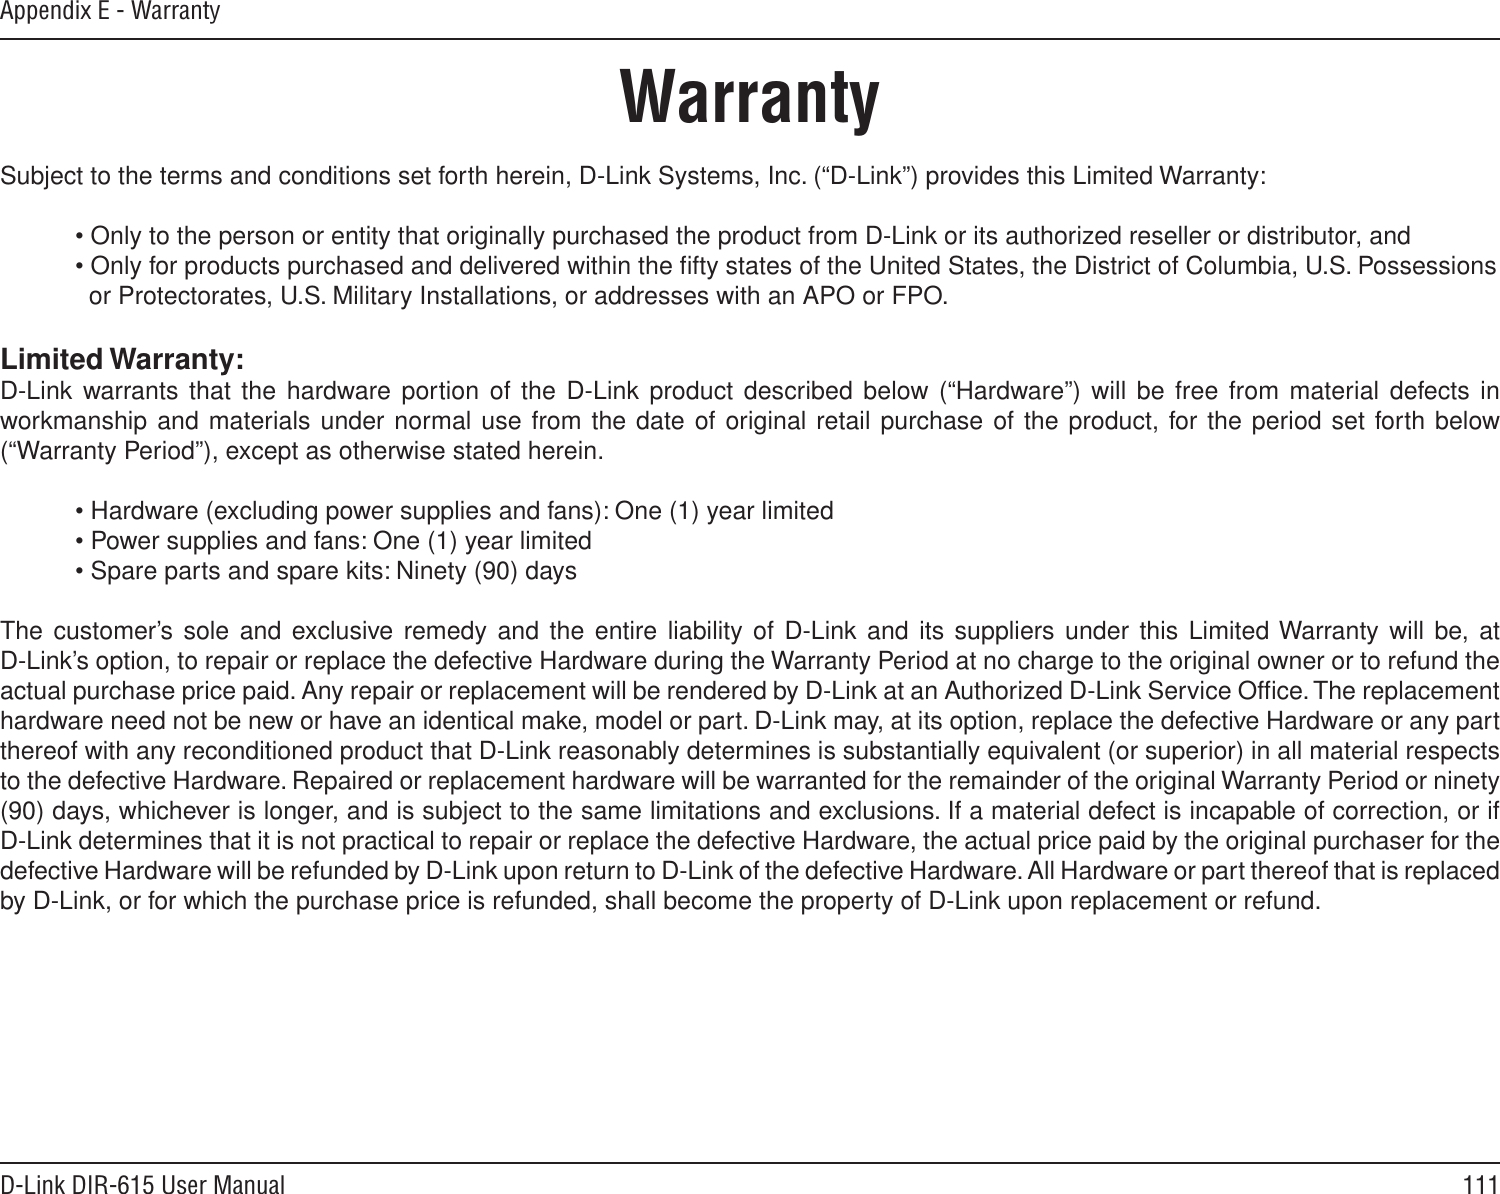 111D-Link DIR-615 User ManualAppendix E - WarrantyWarrantySubject to the terms and conditions set forth herein, D-Link Systems, Inc. (“D-Link”) provides this Limited Warranty:  • Only to the person or entity that originally purchased the product from D-Link or its authorized reseller or distributor, and  • Only for products purchased and delivered within the ﬁfty states of the United States, the District of Columbia, U.S. Possessions      or Protectorates, U.S. Military Installations, or addresses with an APO or FPO.Limited Warranty:D-Link warrants that the hardware portion  of  the  D-Link  product  described below (“Hardware”) will  be  free  from  material defects in workmanship and materials under normal use from the date of original retail purchase of the product, for the period set forth below (“Warranty Period”), except as otherwise stated herein.  • Hardware (excluding power supplies and fans): One (1) year limited  • Power supplies and fans: One (1) year limited  • Spare parts and spare kits: Ninety (90) daysThe customer’s sole and exclusive remedy  and  the  entire  liability  of  D-Link  and  its  suppliers  under  this  Limited Warranty will be, at  D-Link’s option, to repair or replace the defective Hardware during the Warranty Period at no charge to the original owner or to refund the actual purchase price paid. Any repair or replacement will be rendered by D-Link at an Authorized D-Link Service Ofﬁce. The replacement hardware need not be new or have an identical make, model or part. D-Link may, at its option, replace the defective Hardware or any part thereof with any reconditioned product that D-Link reasonably determines is substantially equivalent (or superior) in all material respects to the defective Hardware. Repaired or replacement hardware will be warranted for the remainder of the original Warranty Period or ninety (90) days, whichever is longer, and is subject to the same limitations and exclusions. If a material defect is incapable of correction, or if D-Link determines that it is not practical to repair or replace the defective Hardware, the actual price paid by the original purchaser for the defective Hardware will be refunded by D-Link upon return to D-Link of the defective Hardware. All Hardware or part thereof that is replaced by D-Link, or for which the purchase price is refunded, shall become the property of D-Link upon replacement or refund.